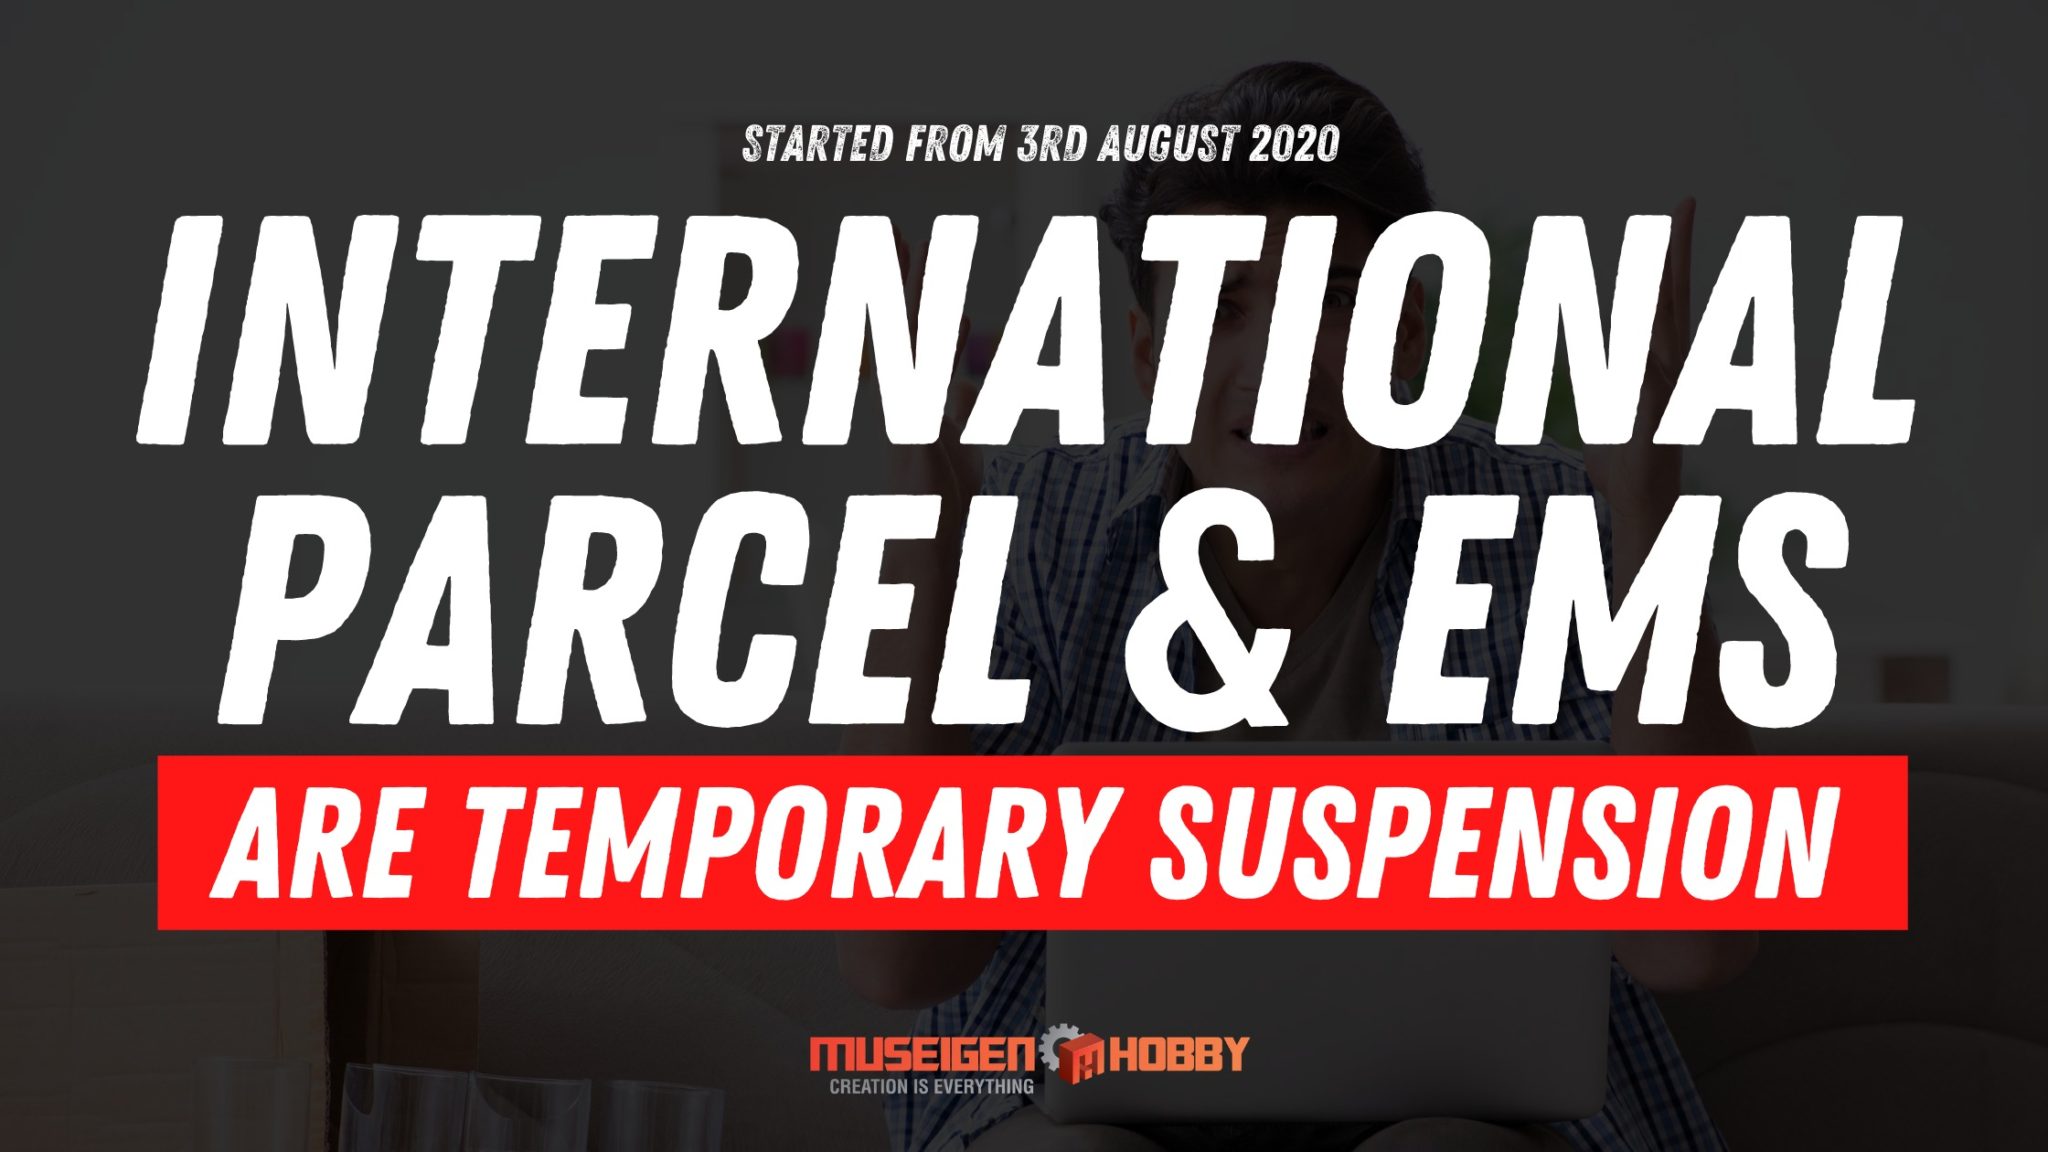 International parcel and ems are temporary suspension